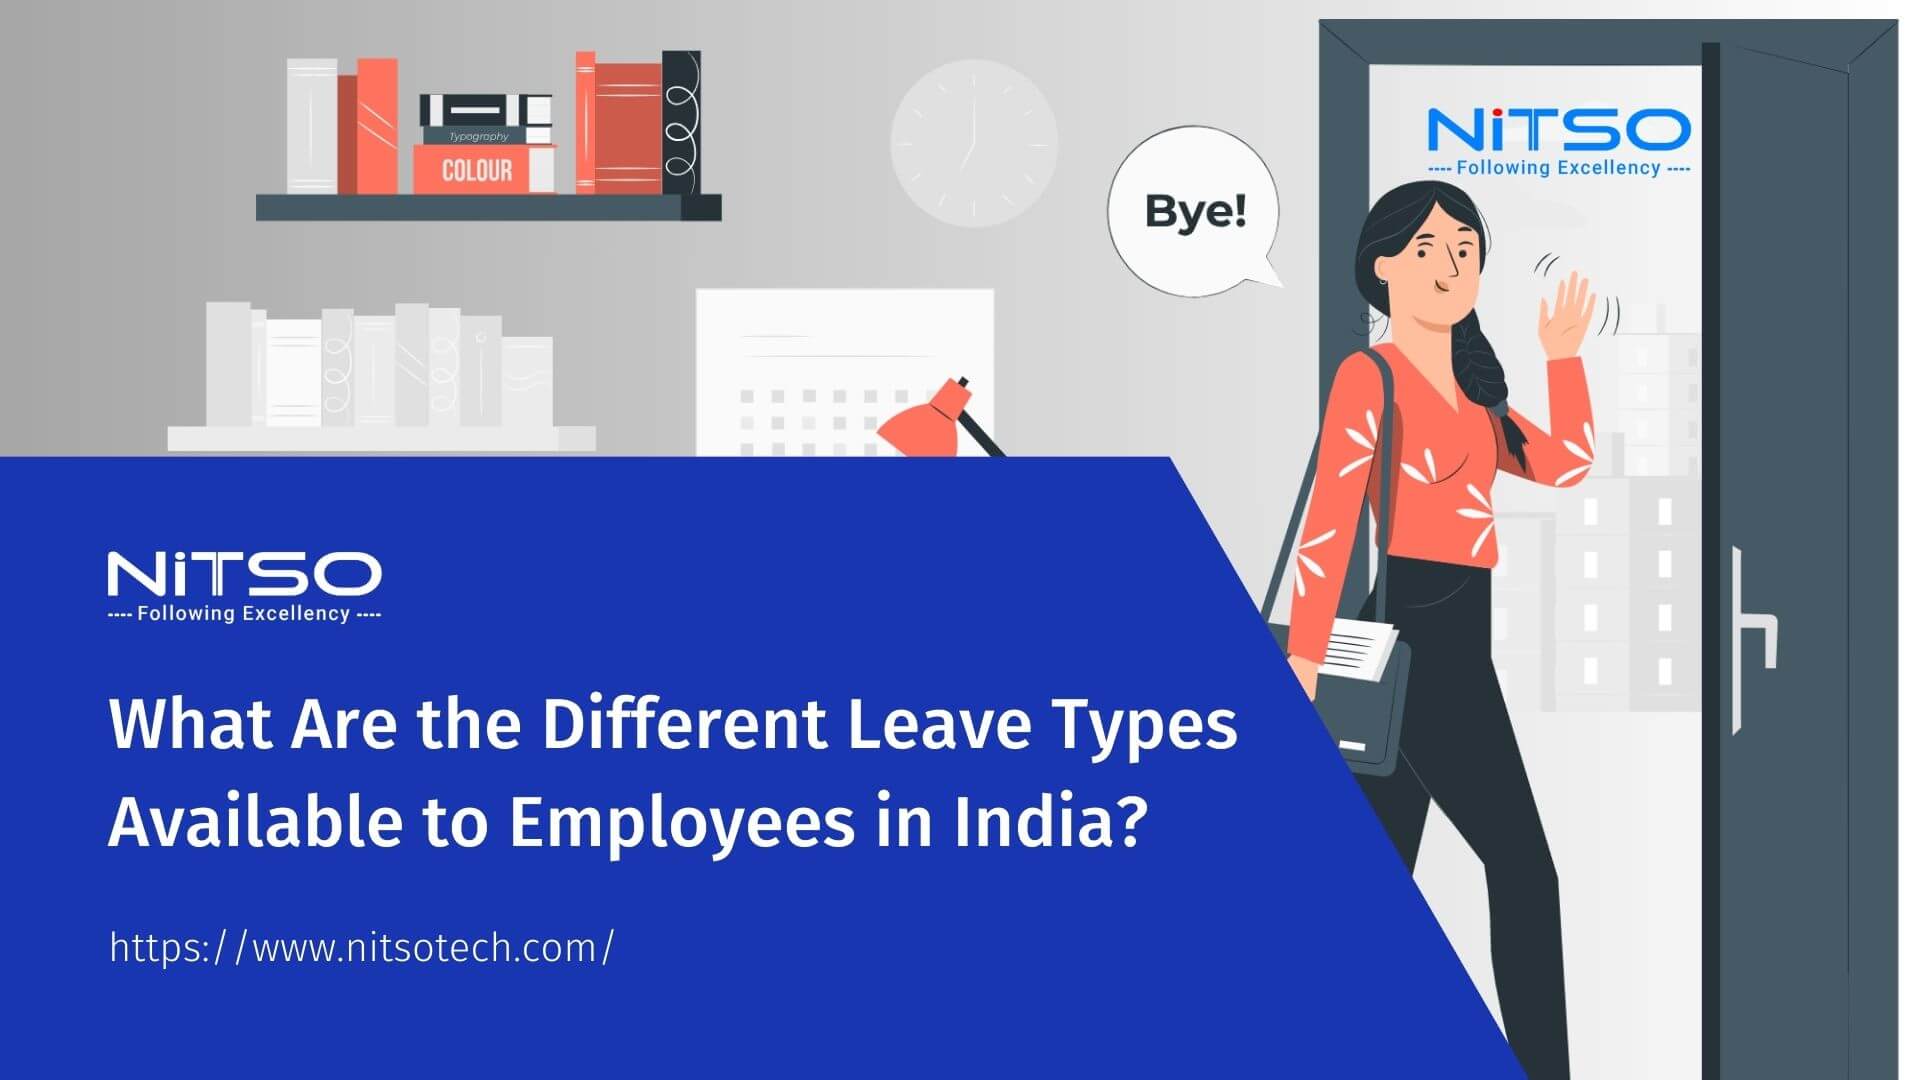 What Are the Different Leave Types Available to Employees in India?